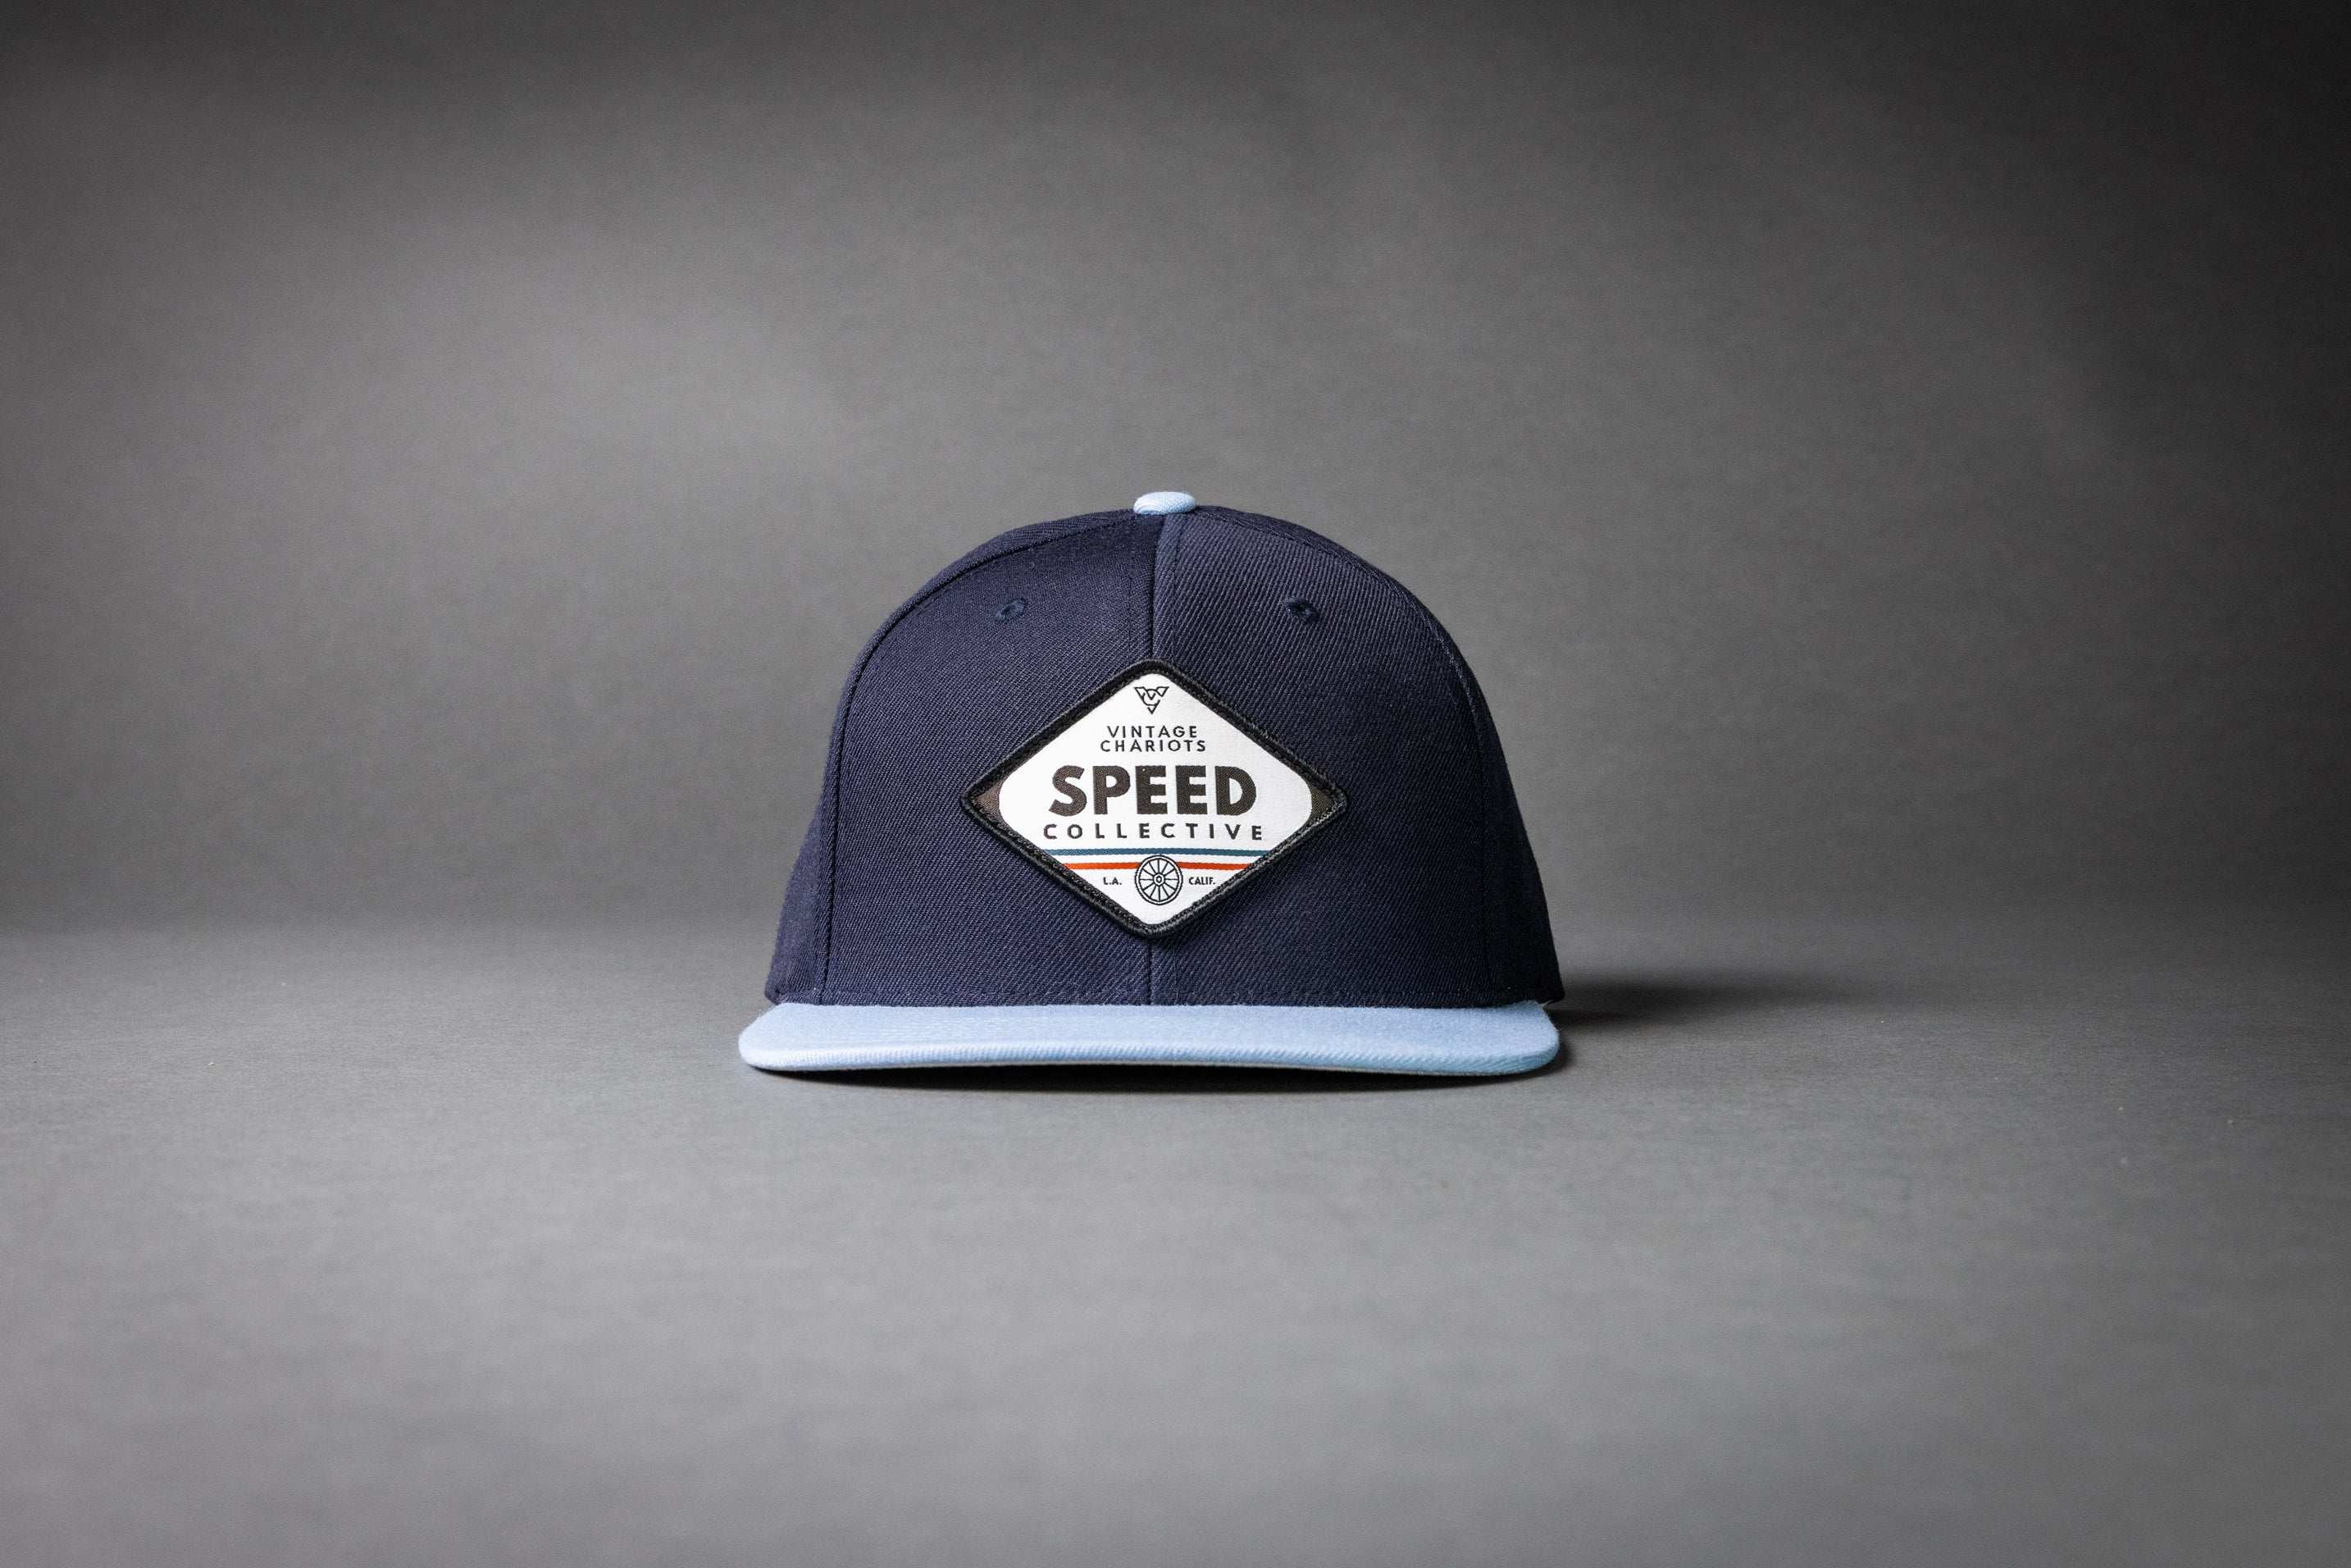 SPEED COLLECTIVE (Navy/Columbia Blue)